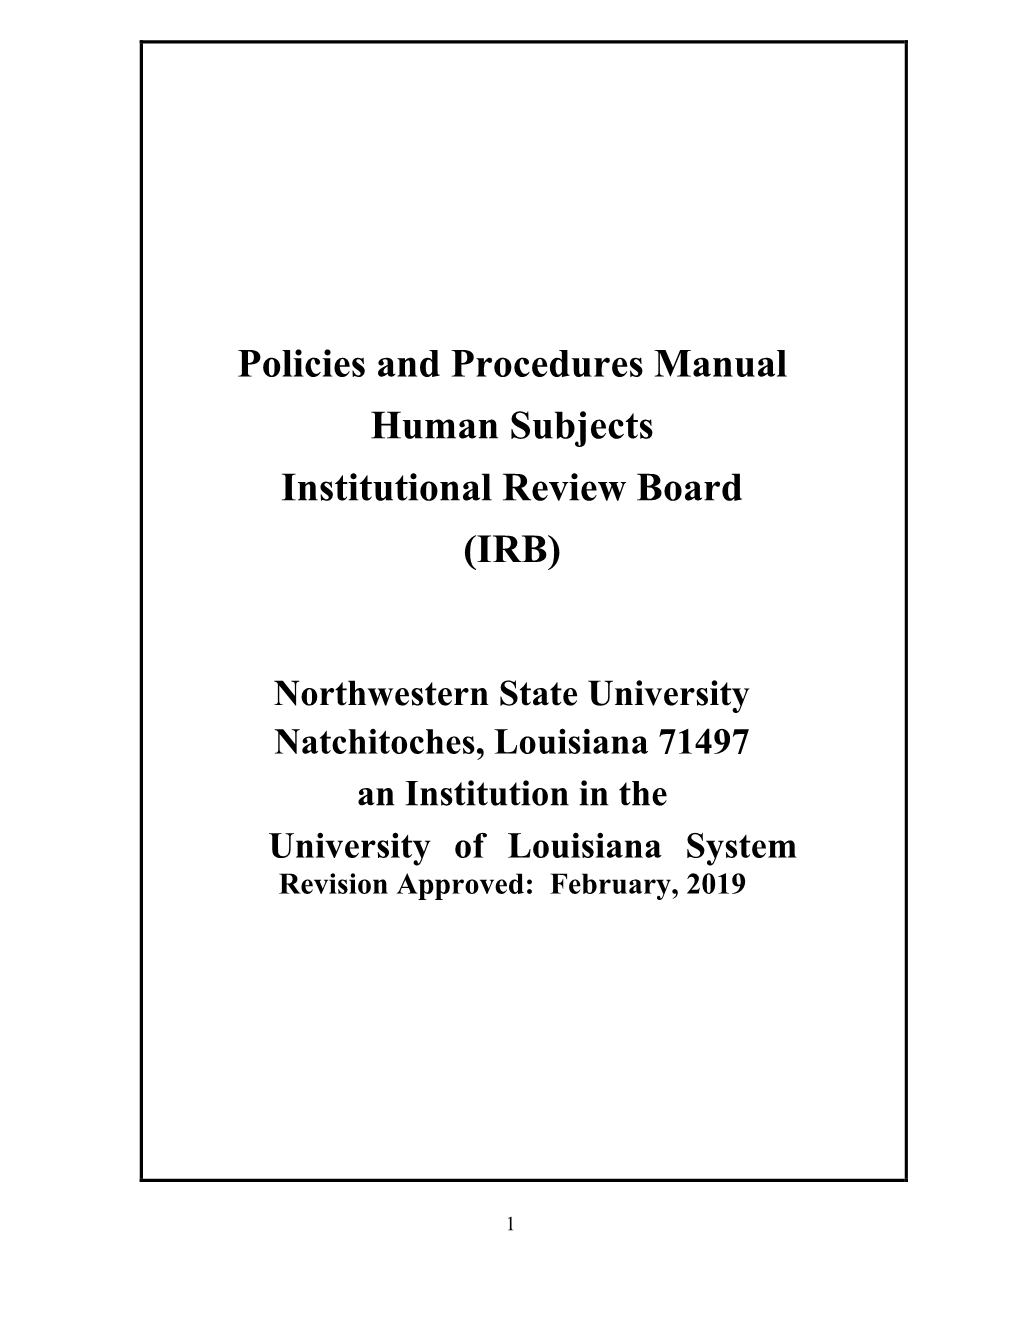 Policies and Procedures Manual Human Subjects Institutional